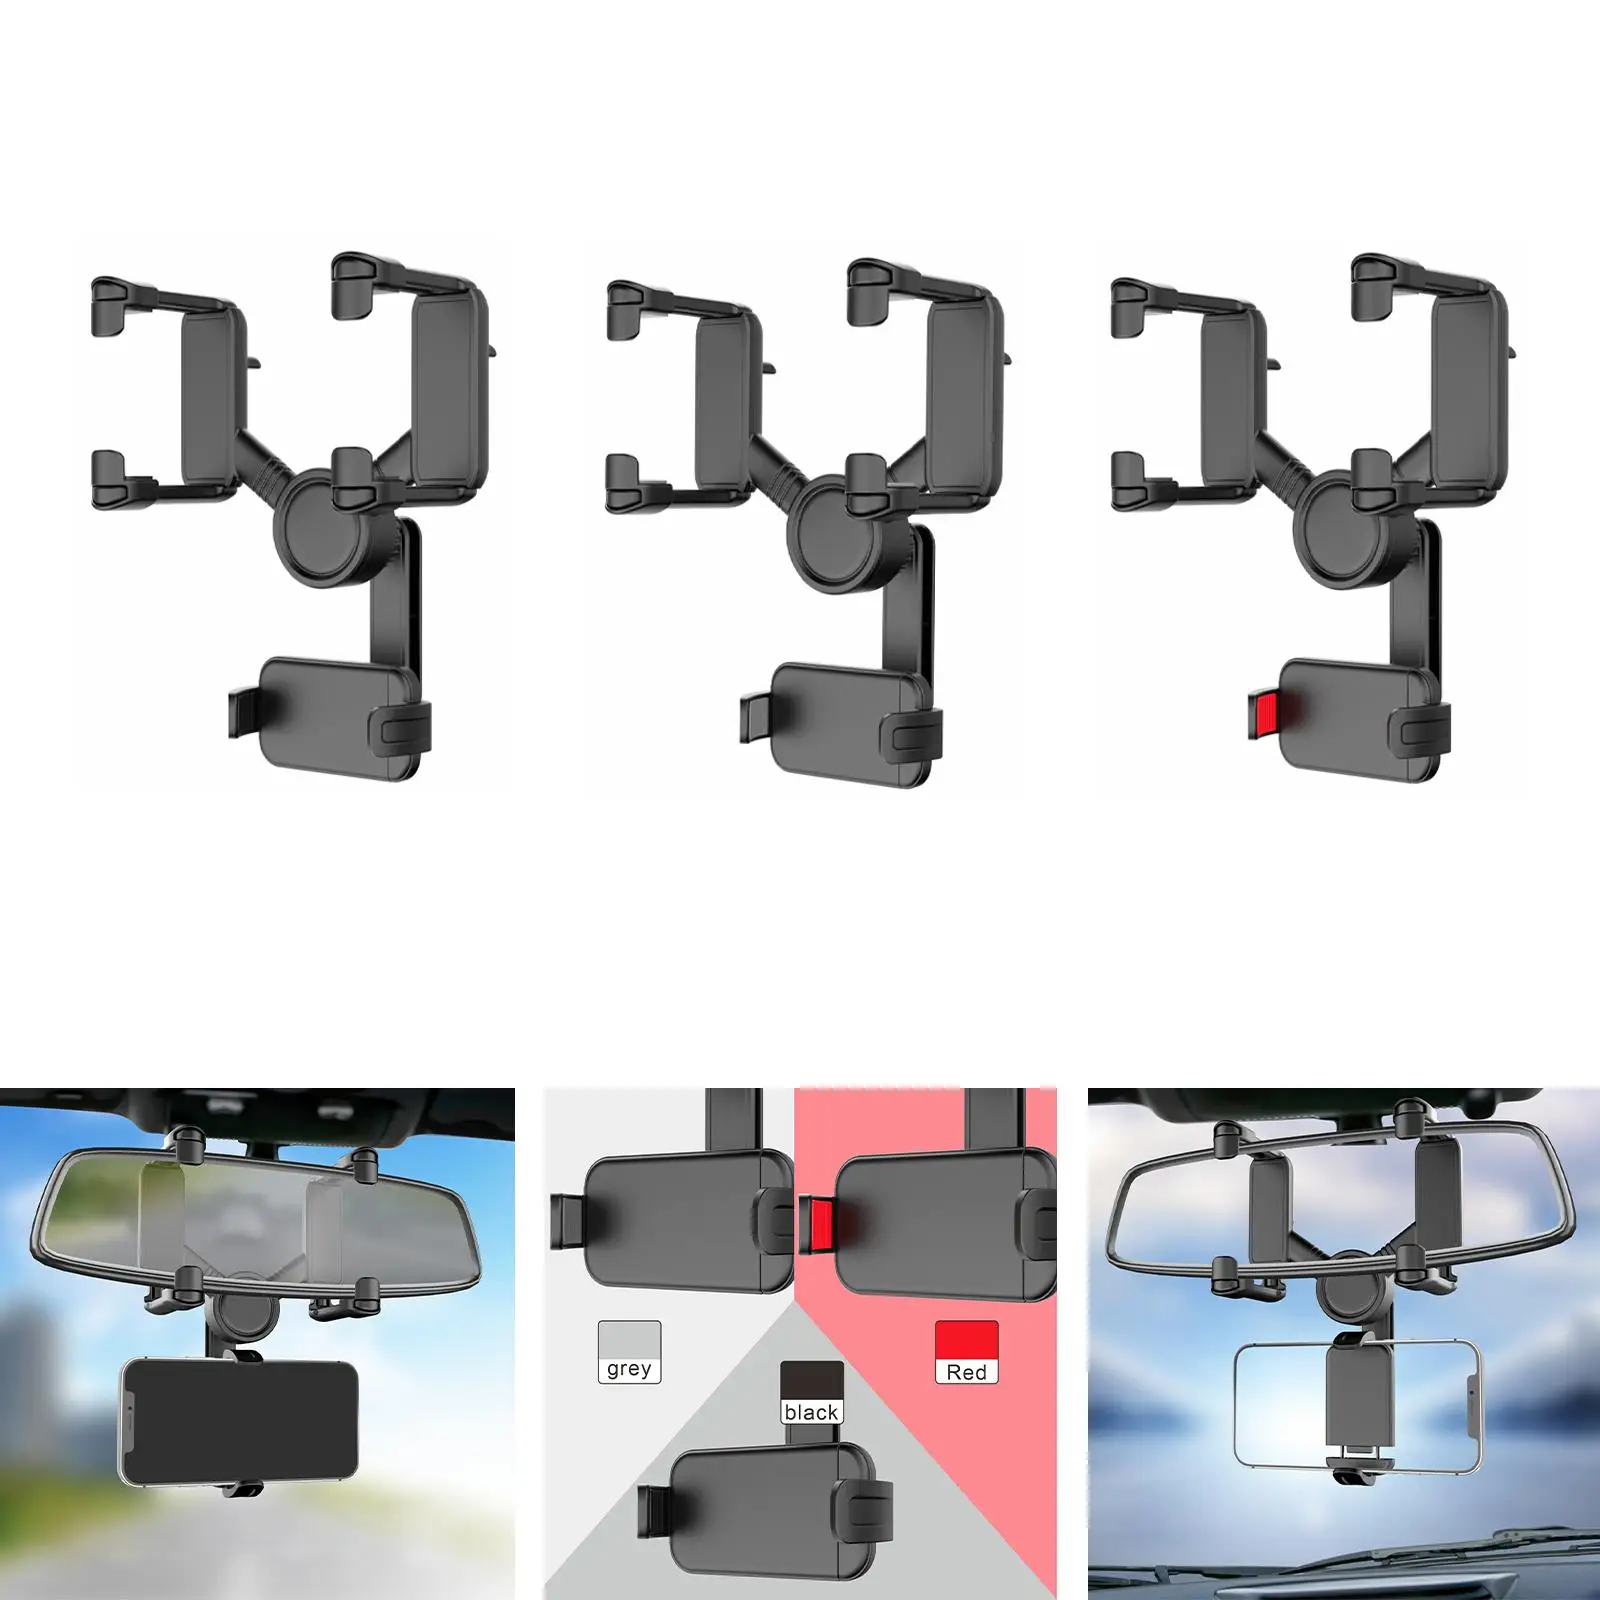   Phone Holder Mount 360 Degree Rotatable Fit for Smartphone